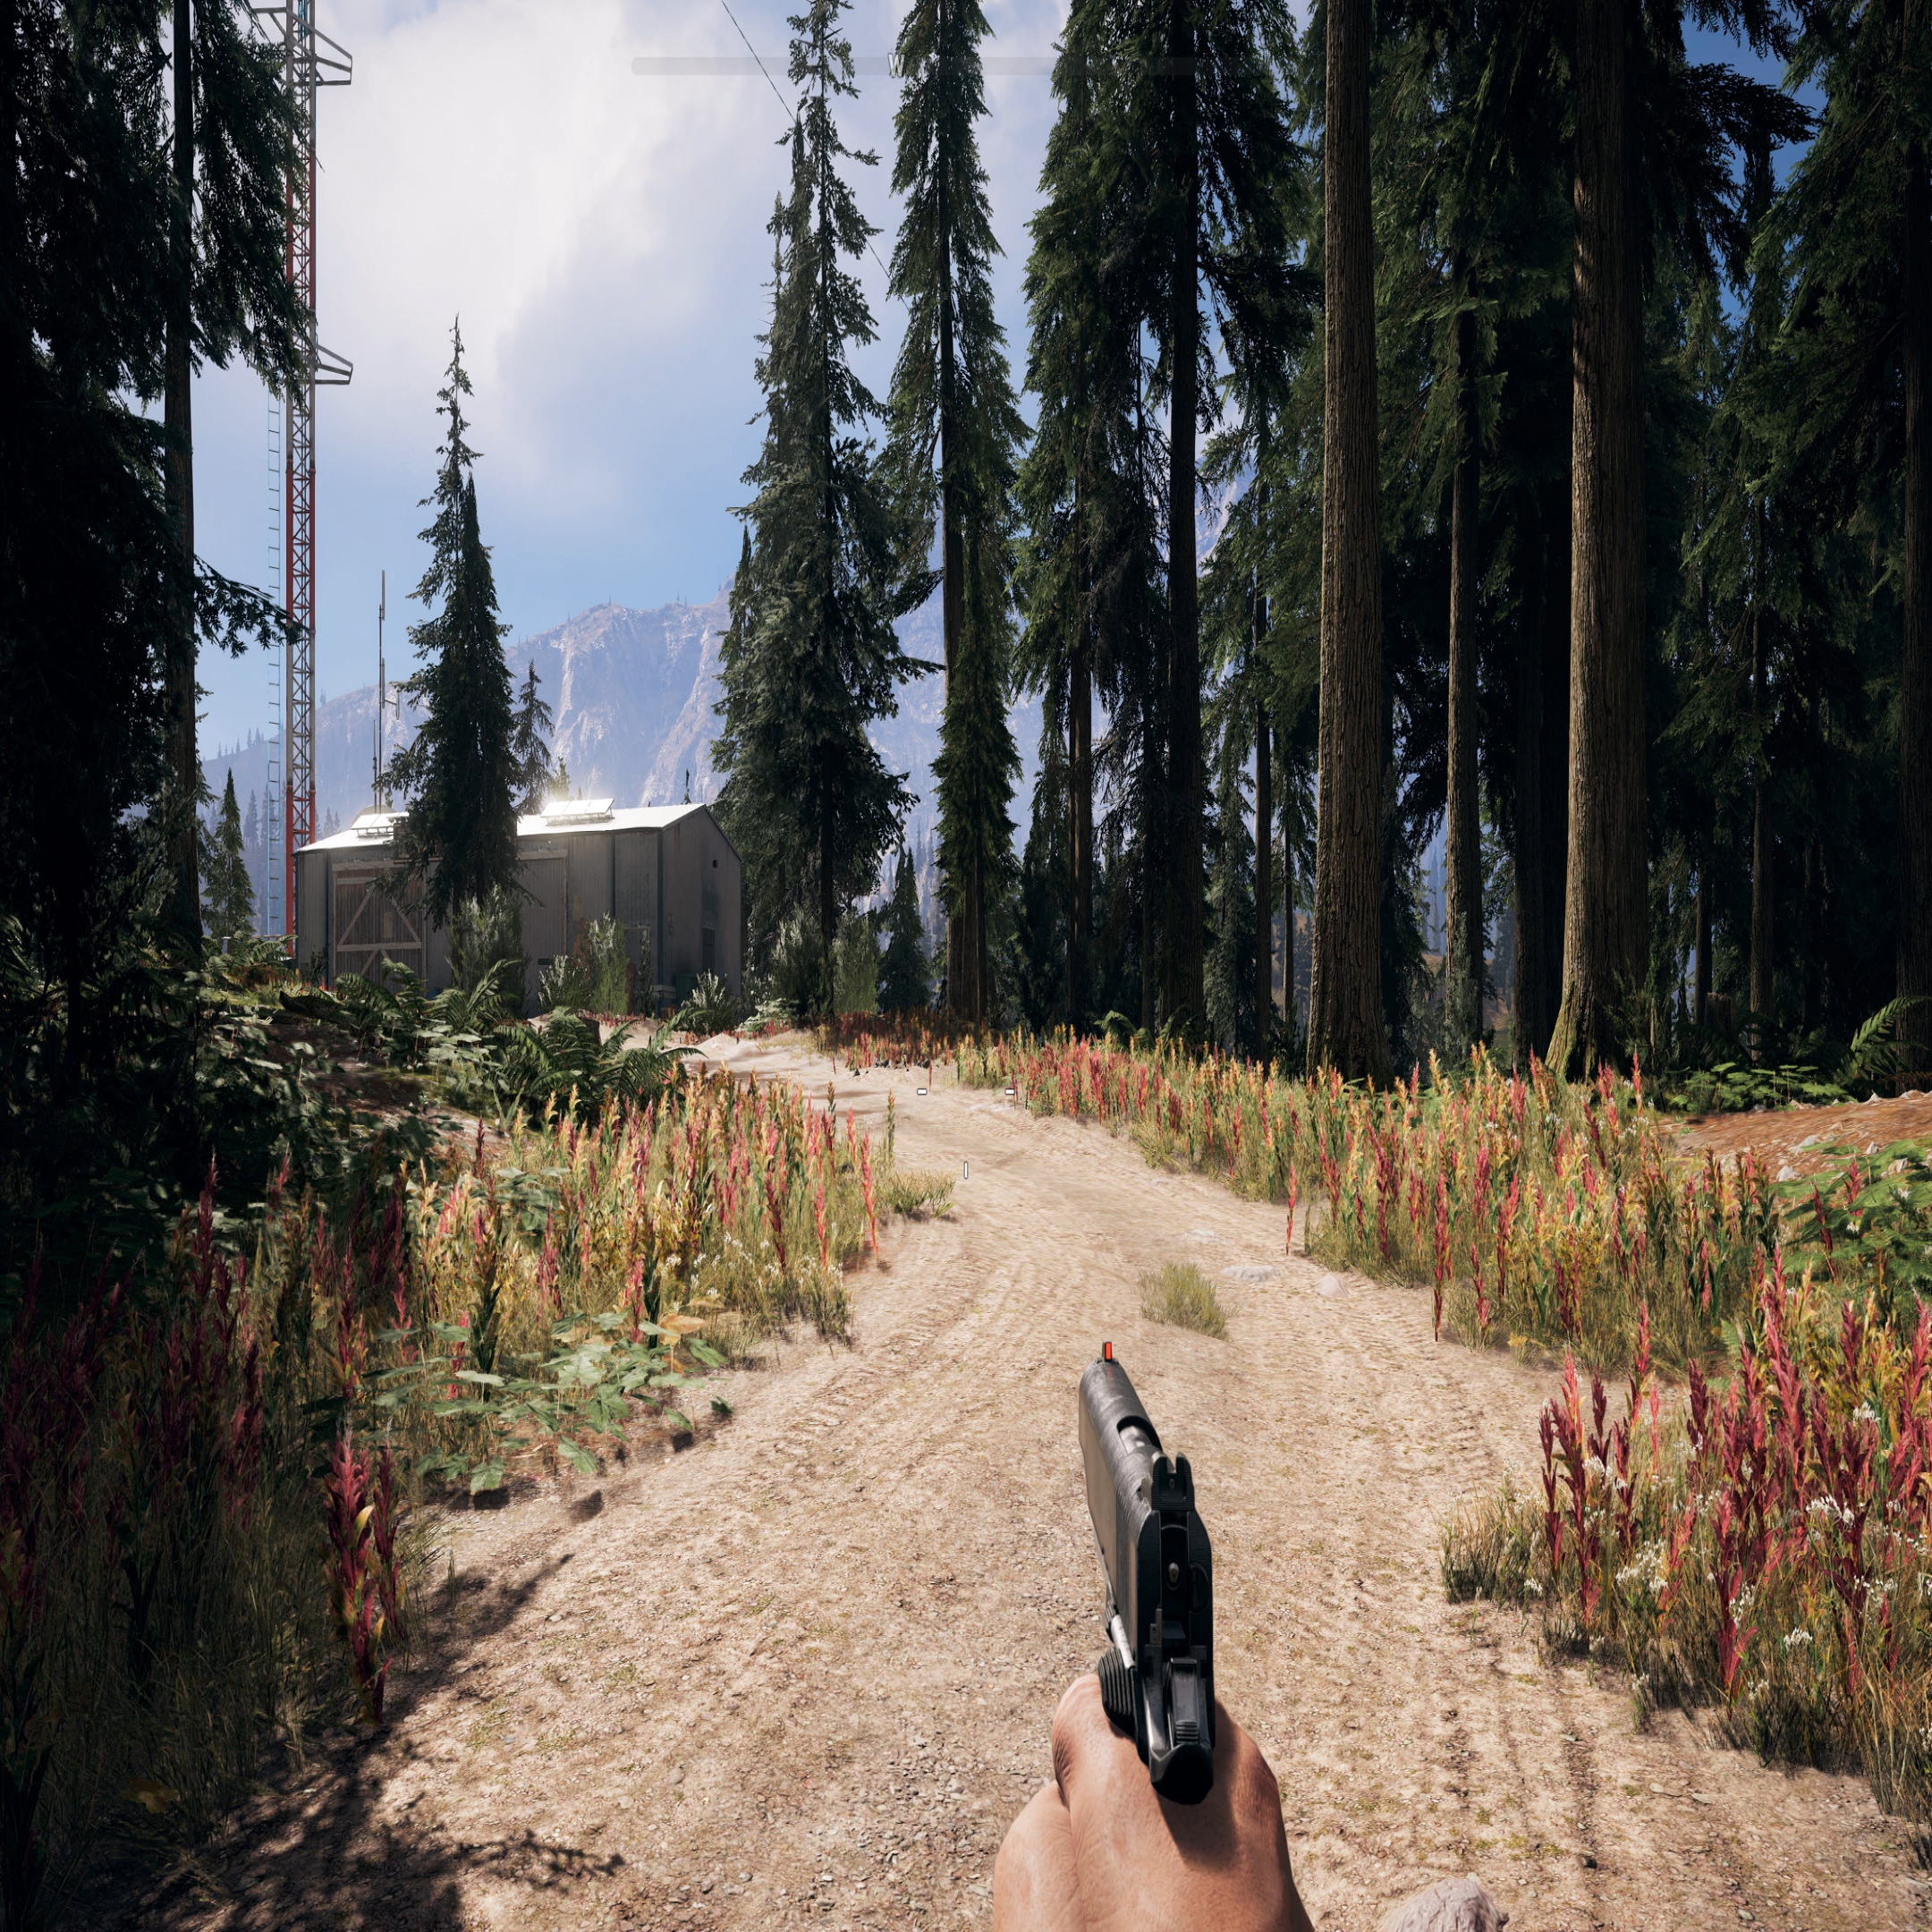 Far Cry 5 Xbox One vs. PS4 Comparison: Which One Looks the